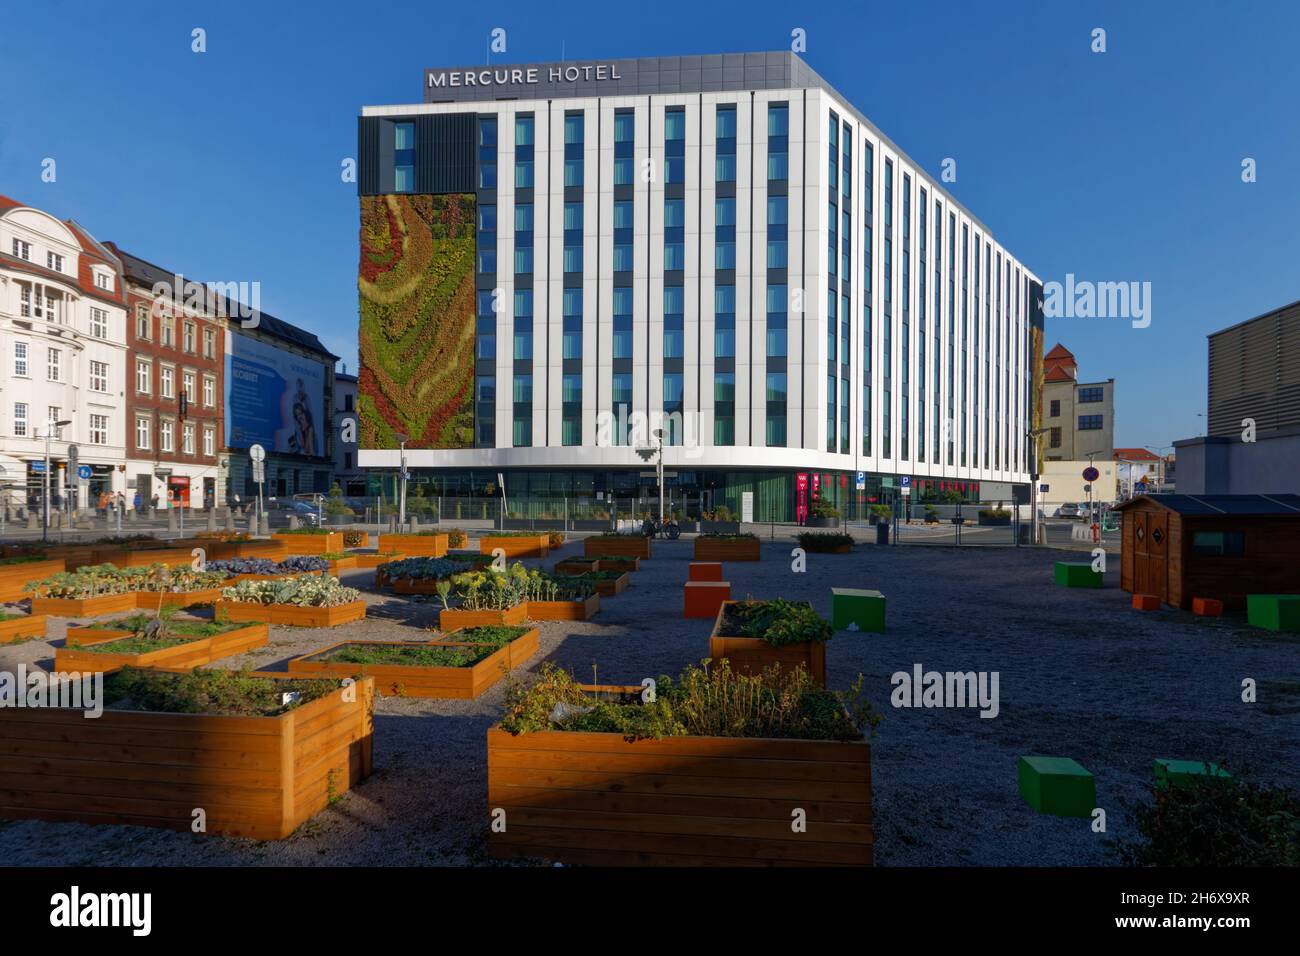 Hetal Accor Mercury in Katowice, with the vertical garden in two corners of the facade. Stock Photo